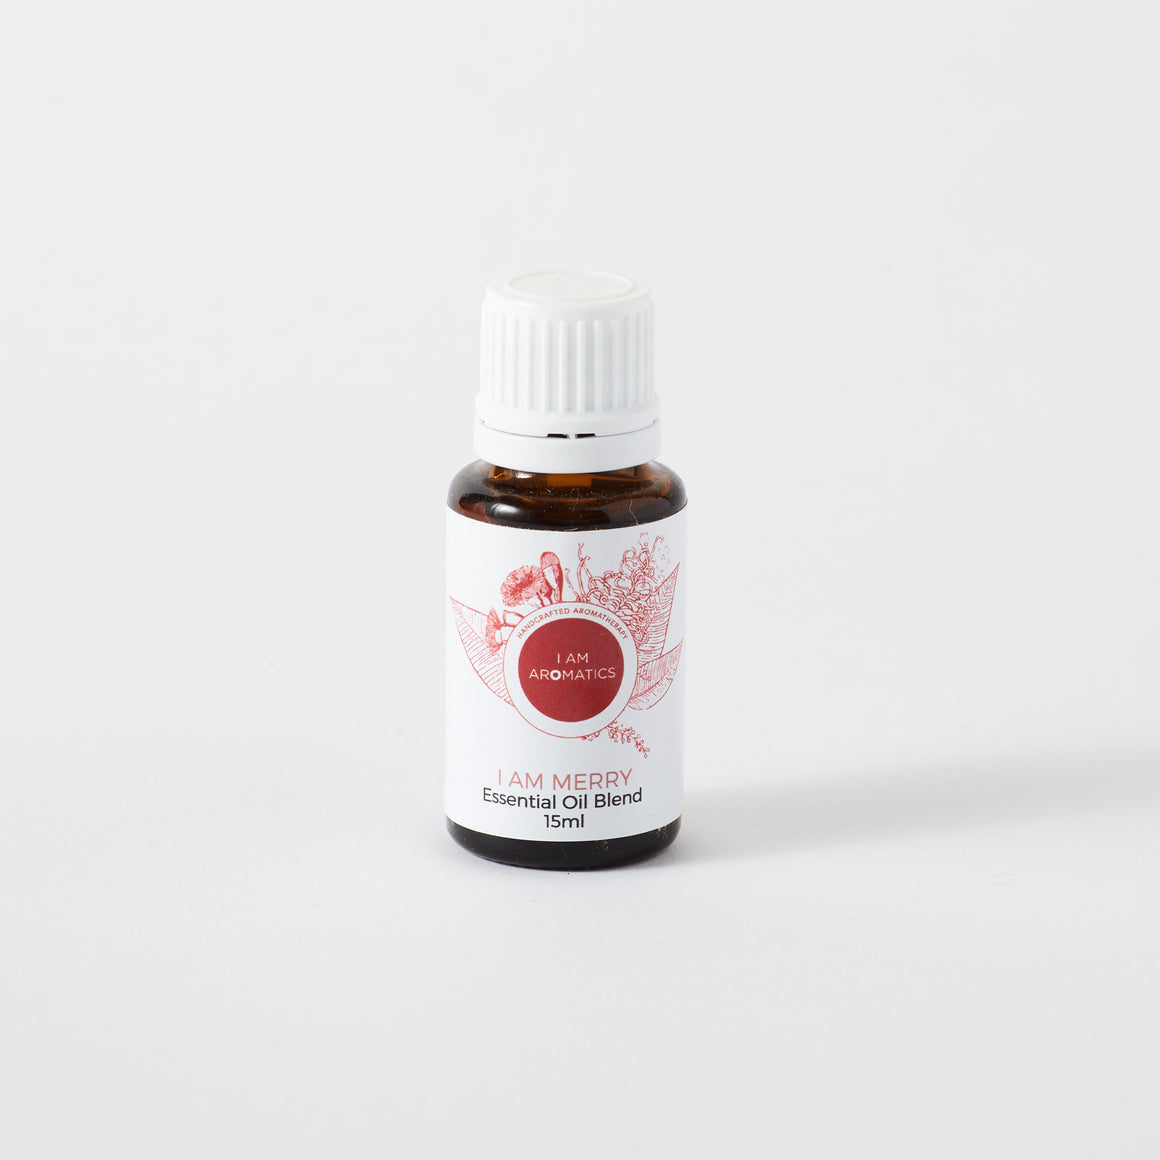 Merry essential oil blend, 15ml amber bottle, with white lid, white label, deep red botanical logo and font